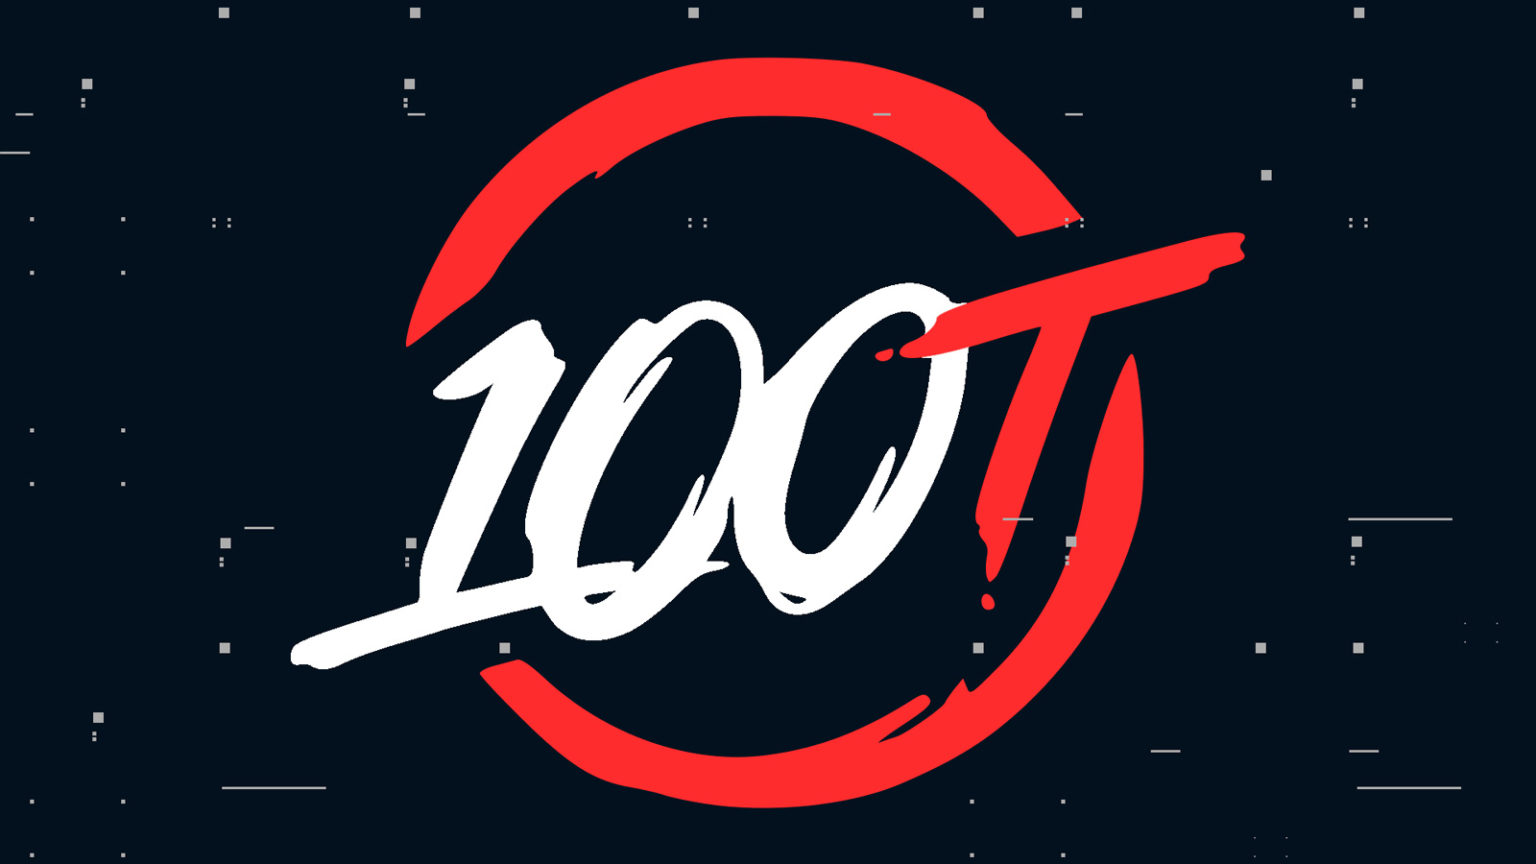 100 thieves announced that it will develop its own video game!